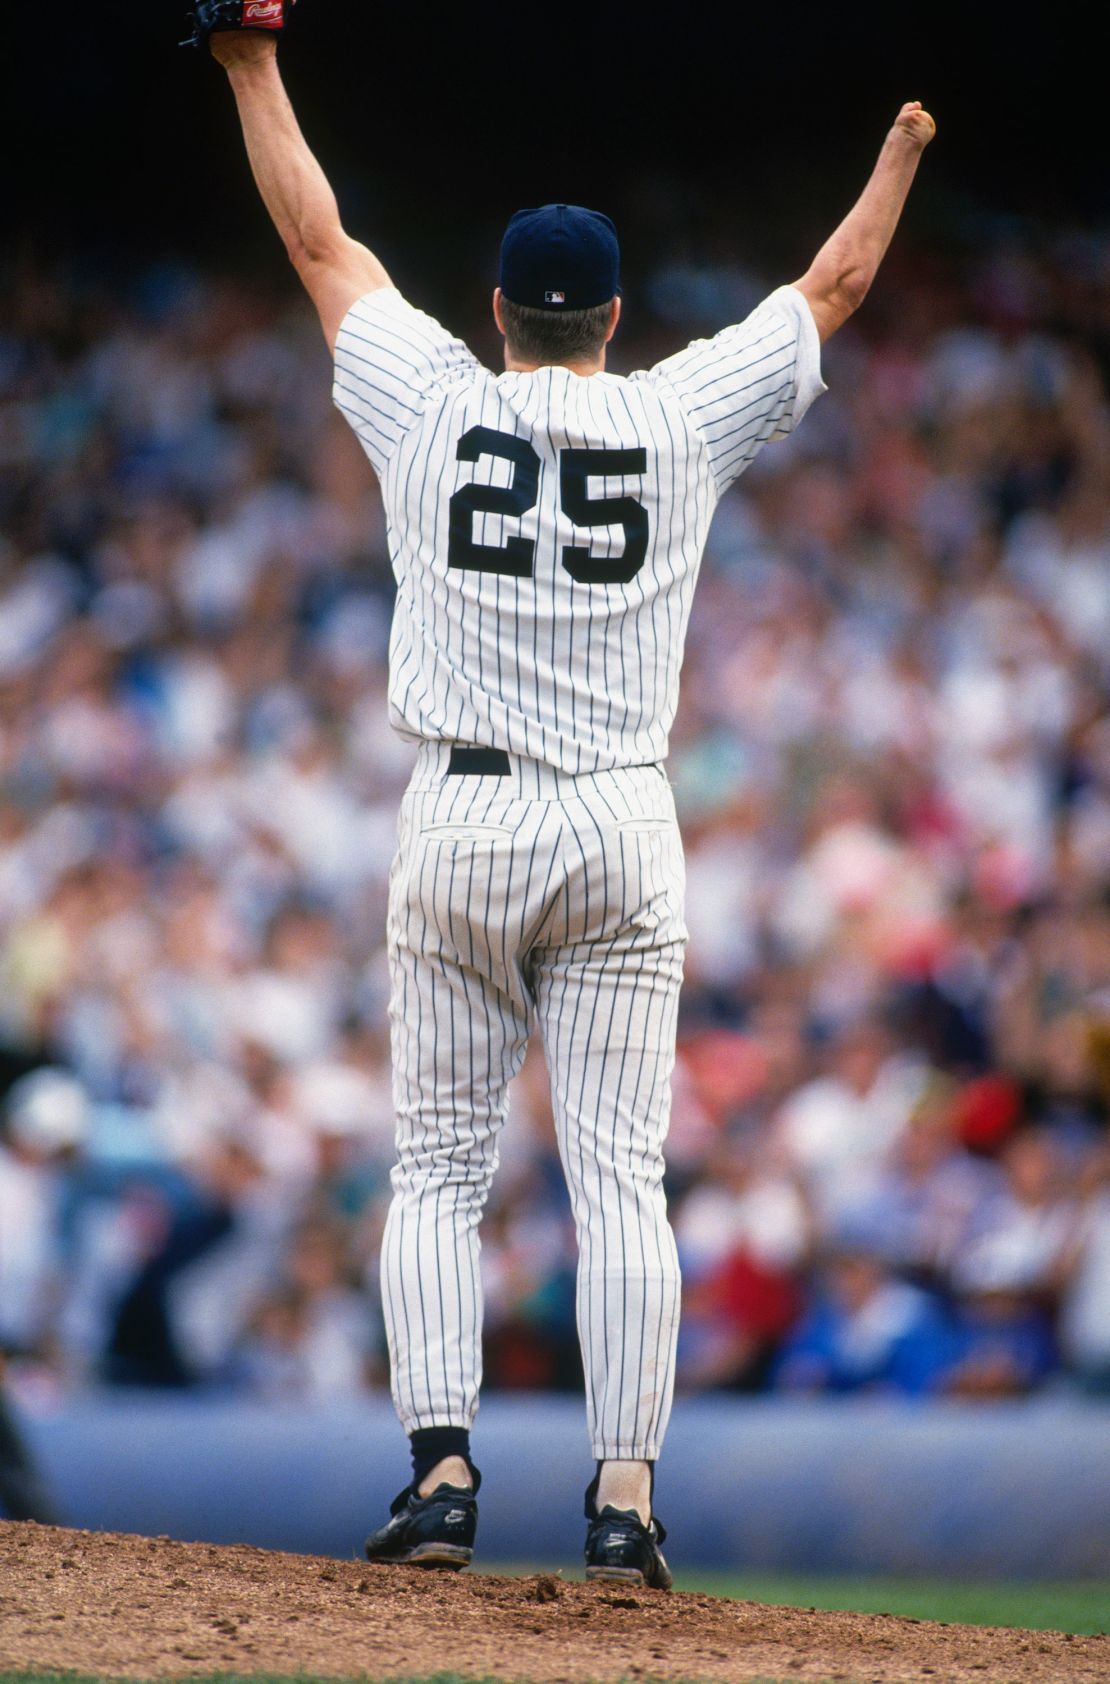 BRONX, NY - SEPTEMBER 4:  Jim Abbott #25, pitcher for the New York Yankees, raises his arms in celebration after pitching a no hitter against the Cleveland Indians at Yankee Stadium on September 4, 1993 in Bronx, New York. (Photo by Focus on Sport via Getty Images)